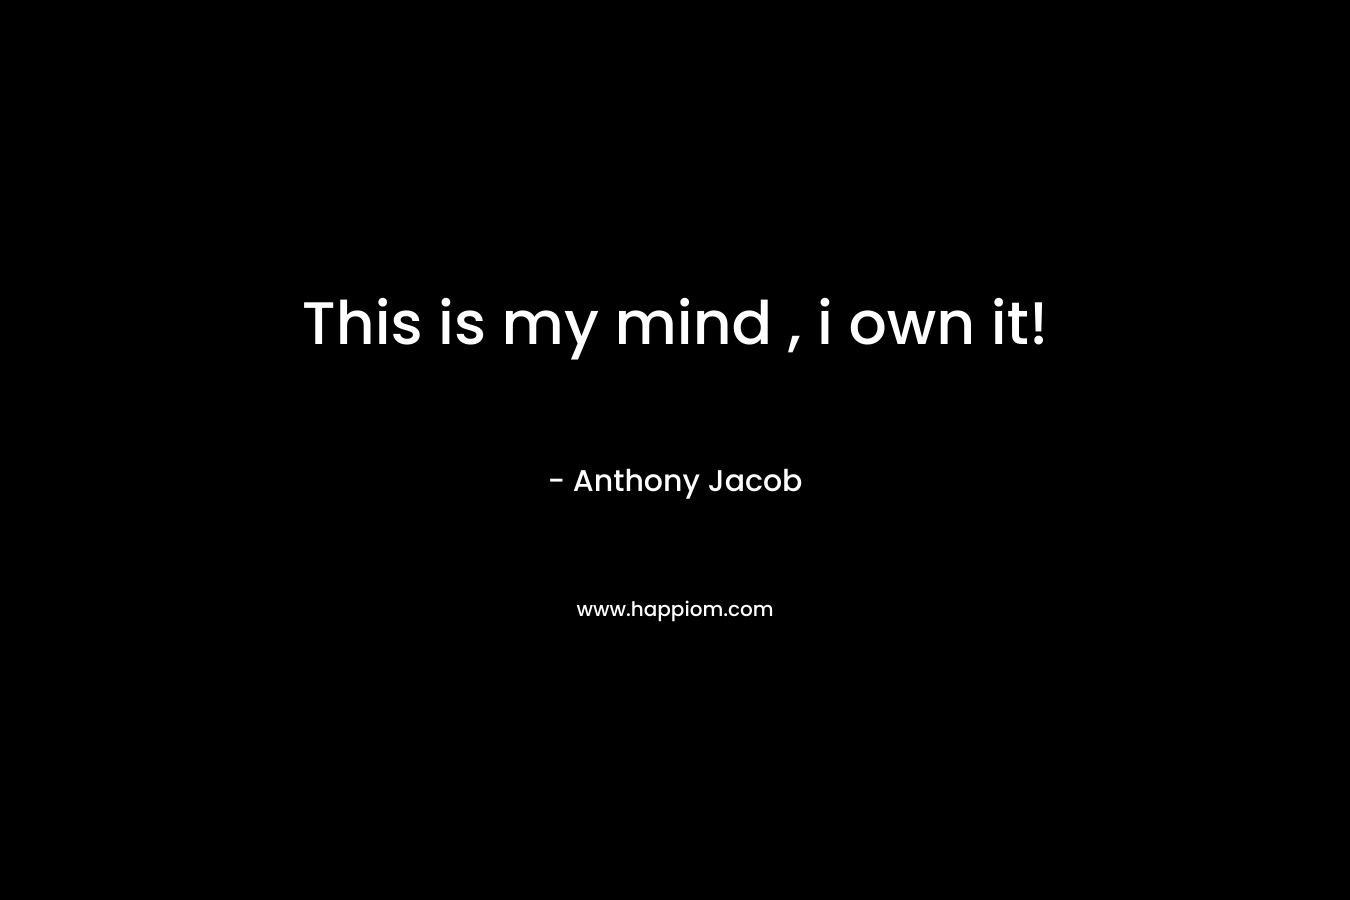 This is my mind , i own it! – Anthony Jacob